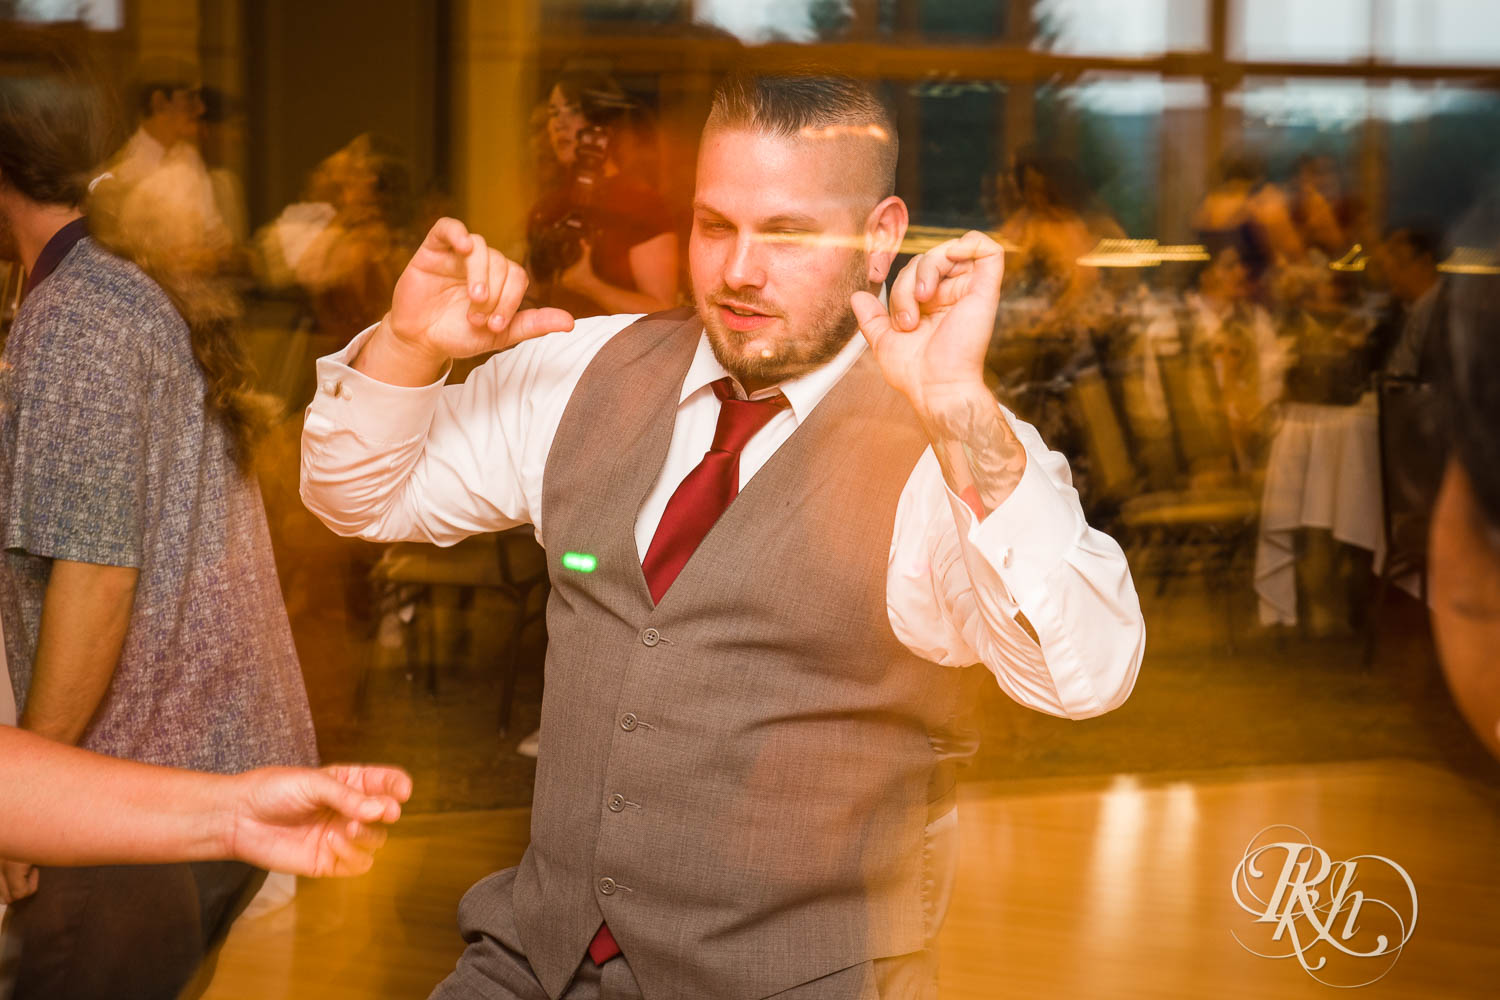 Guests dance during wedding reception at Plymouth Creek Center in Plymouth, Minnesota.